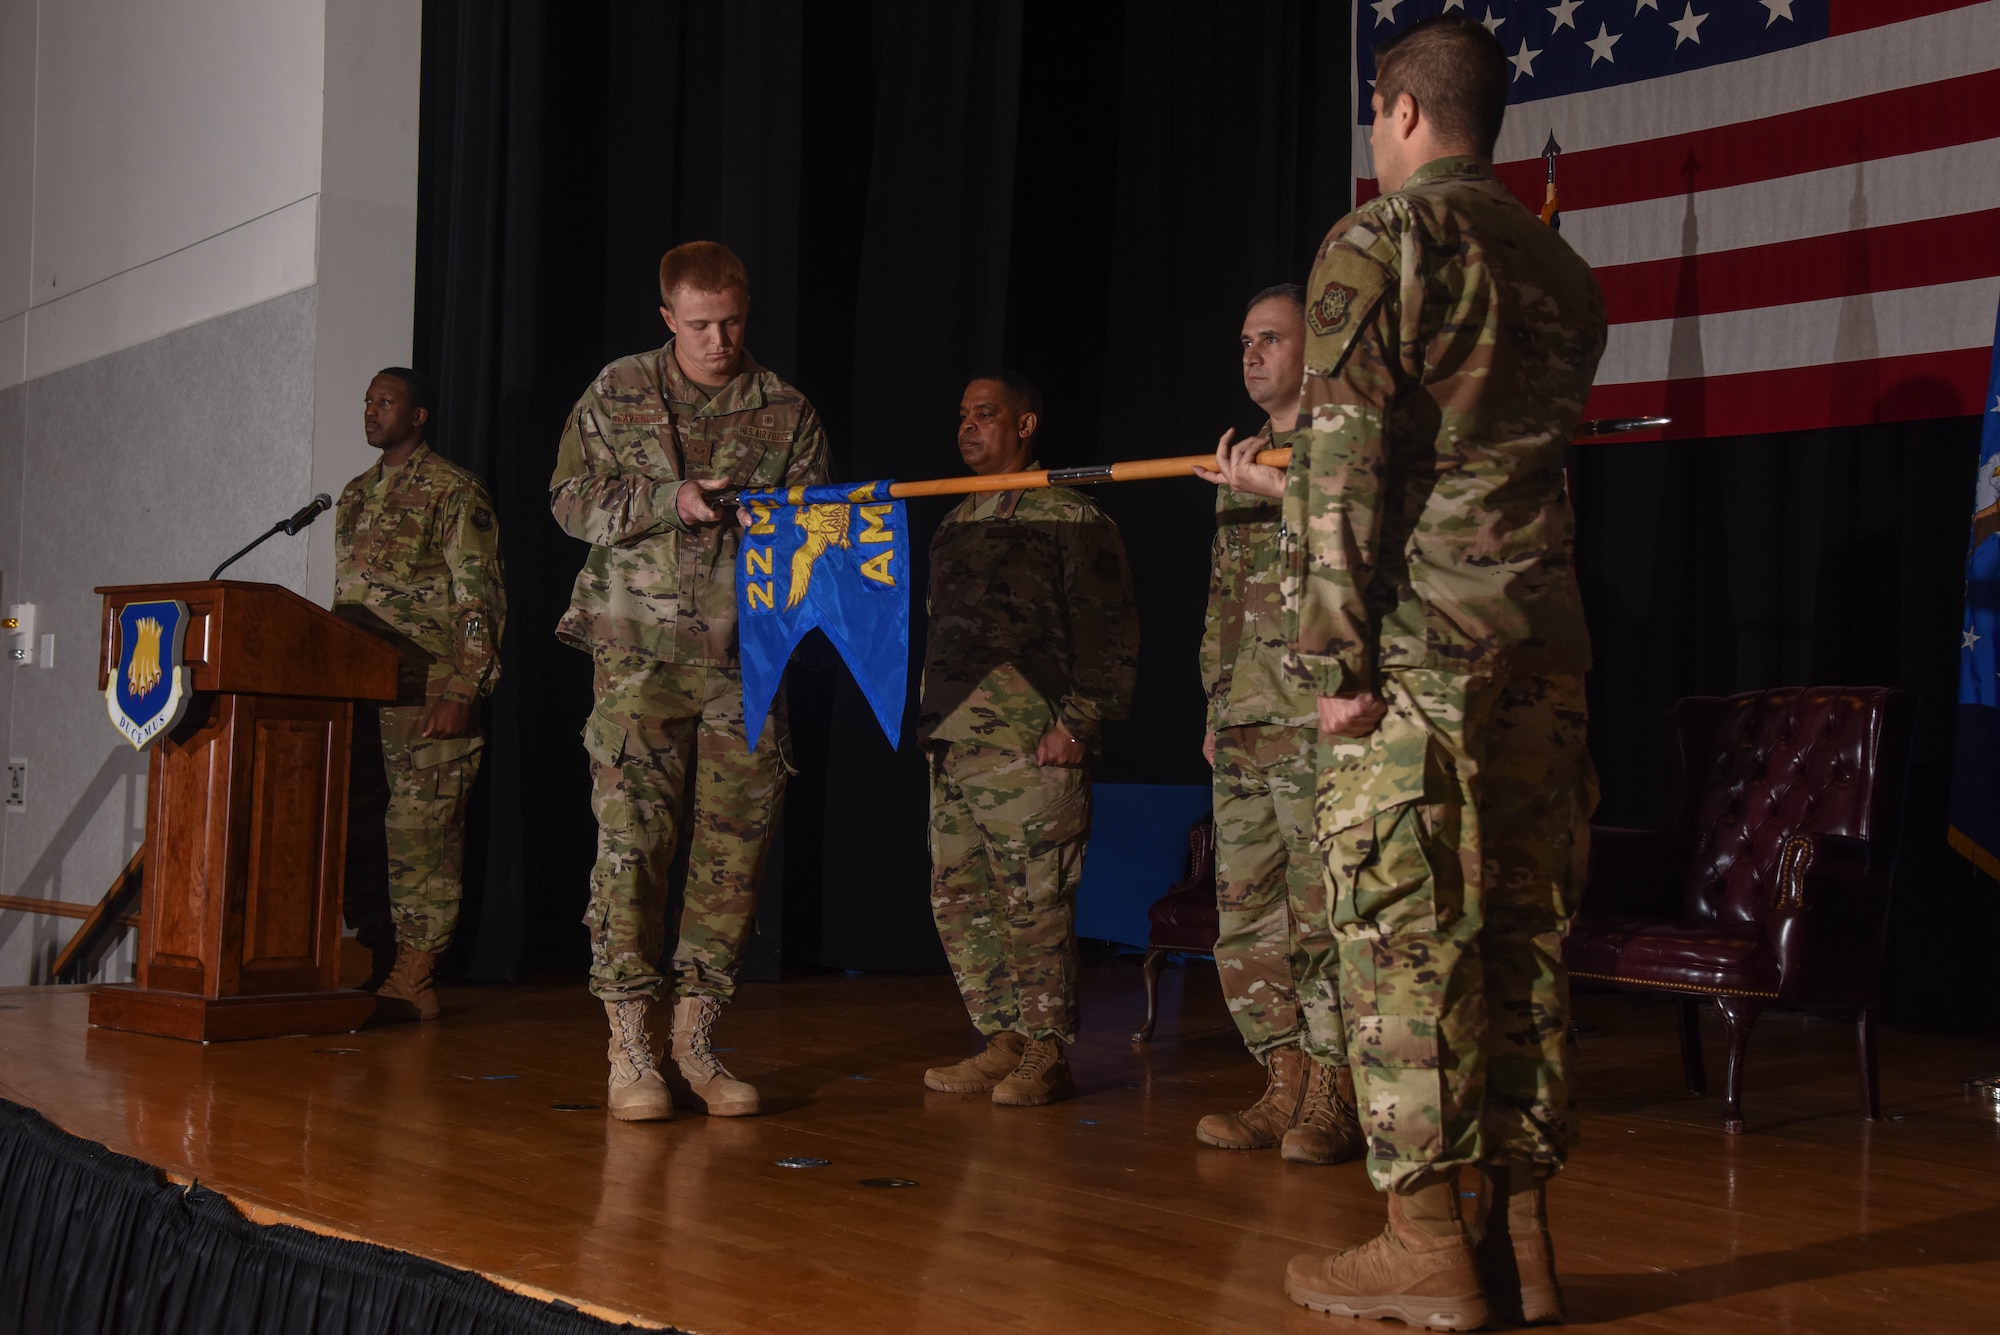 Senior Airman Alexander Cavender, 22nd Operational Medical Readiness Squadron bioenvironmental technician, furls the 22nd Aerospace Medicine Squadron guidon during a redesignation ceremony Aug. 29, 2019, at McConnell Air Force Base, Kan. The 22nd AMDS was redesignated to the 22nd OMRS respectively after 24 years. (U.S. Air Force photo by Airman 1st Class Marc A. Garcia)